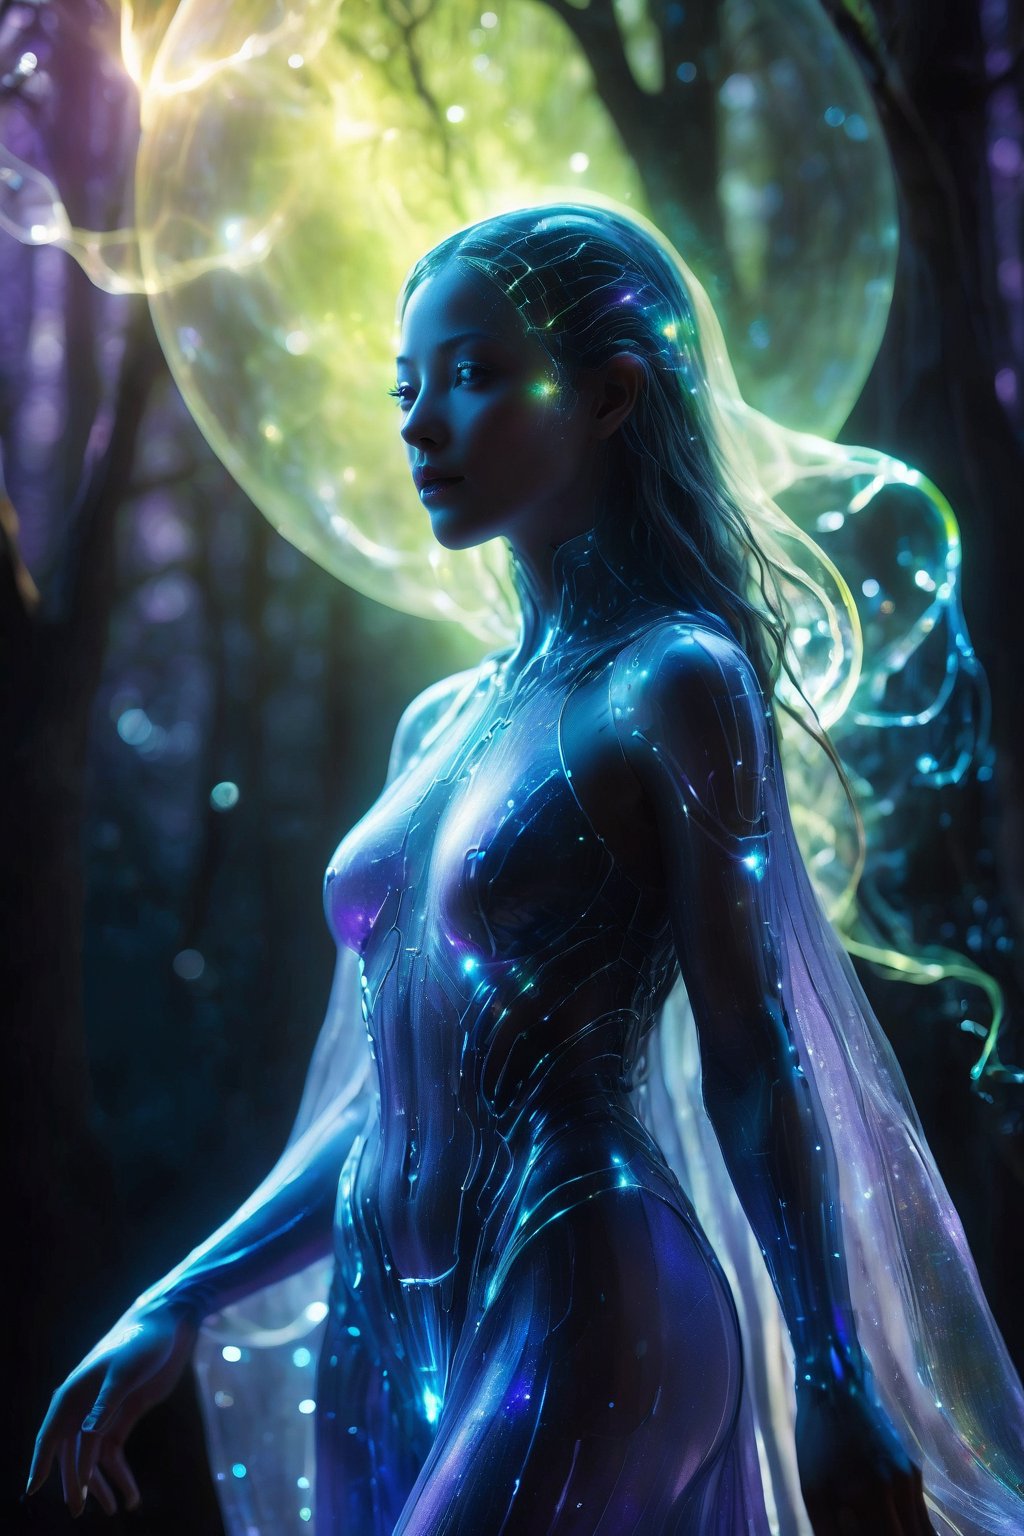 Strong Backlit Particles, Highly detailed Gaia figure, translucent effect:2, mid-shot, playful manipulation, detailed natural backdrop, strong lines, rule of thirds, backlit beauty, ultraviolet light particles, direct eye contact, serene environment, high quality, ethereal presence.